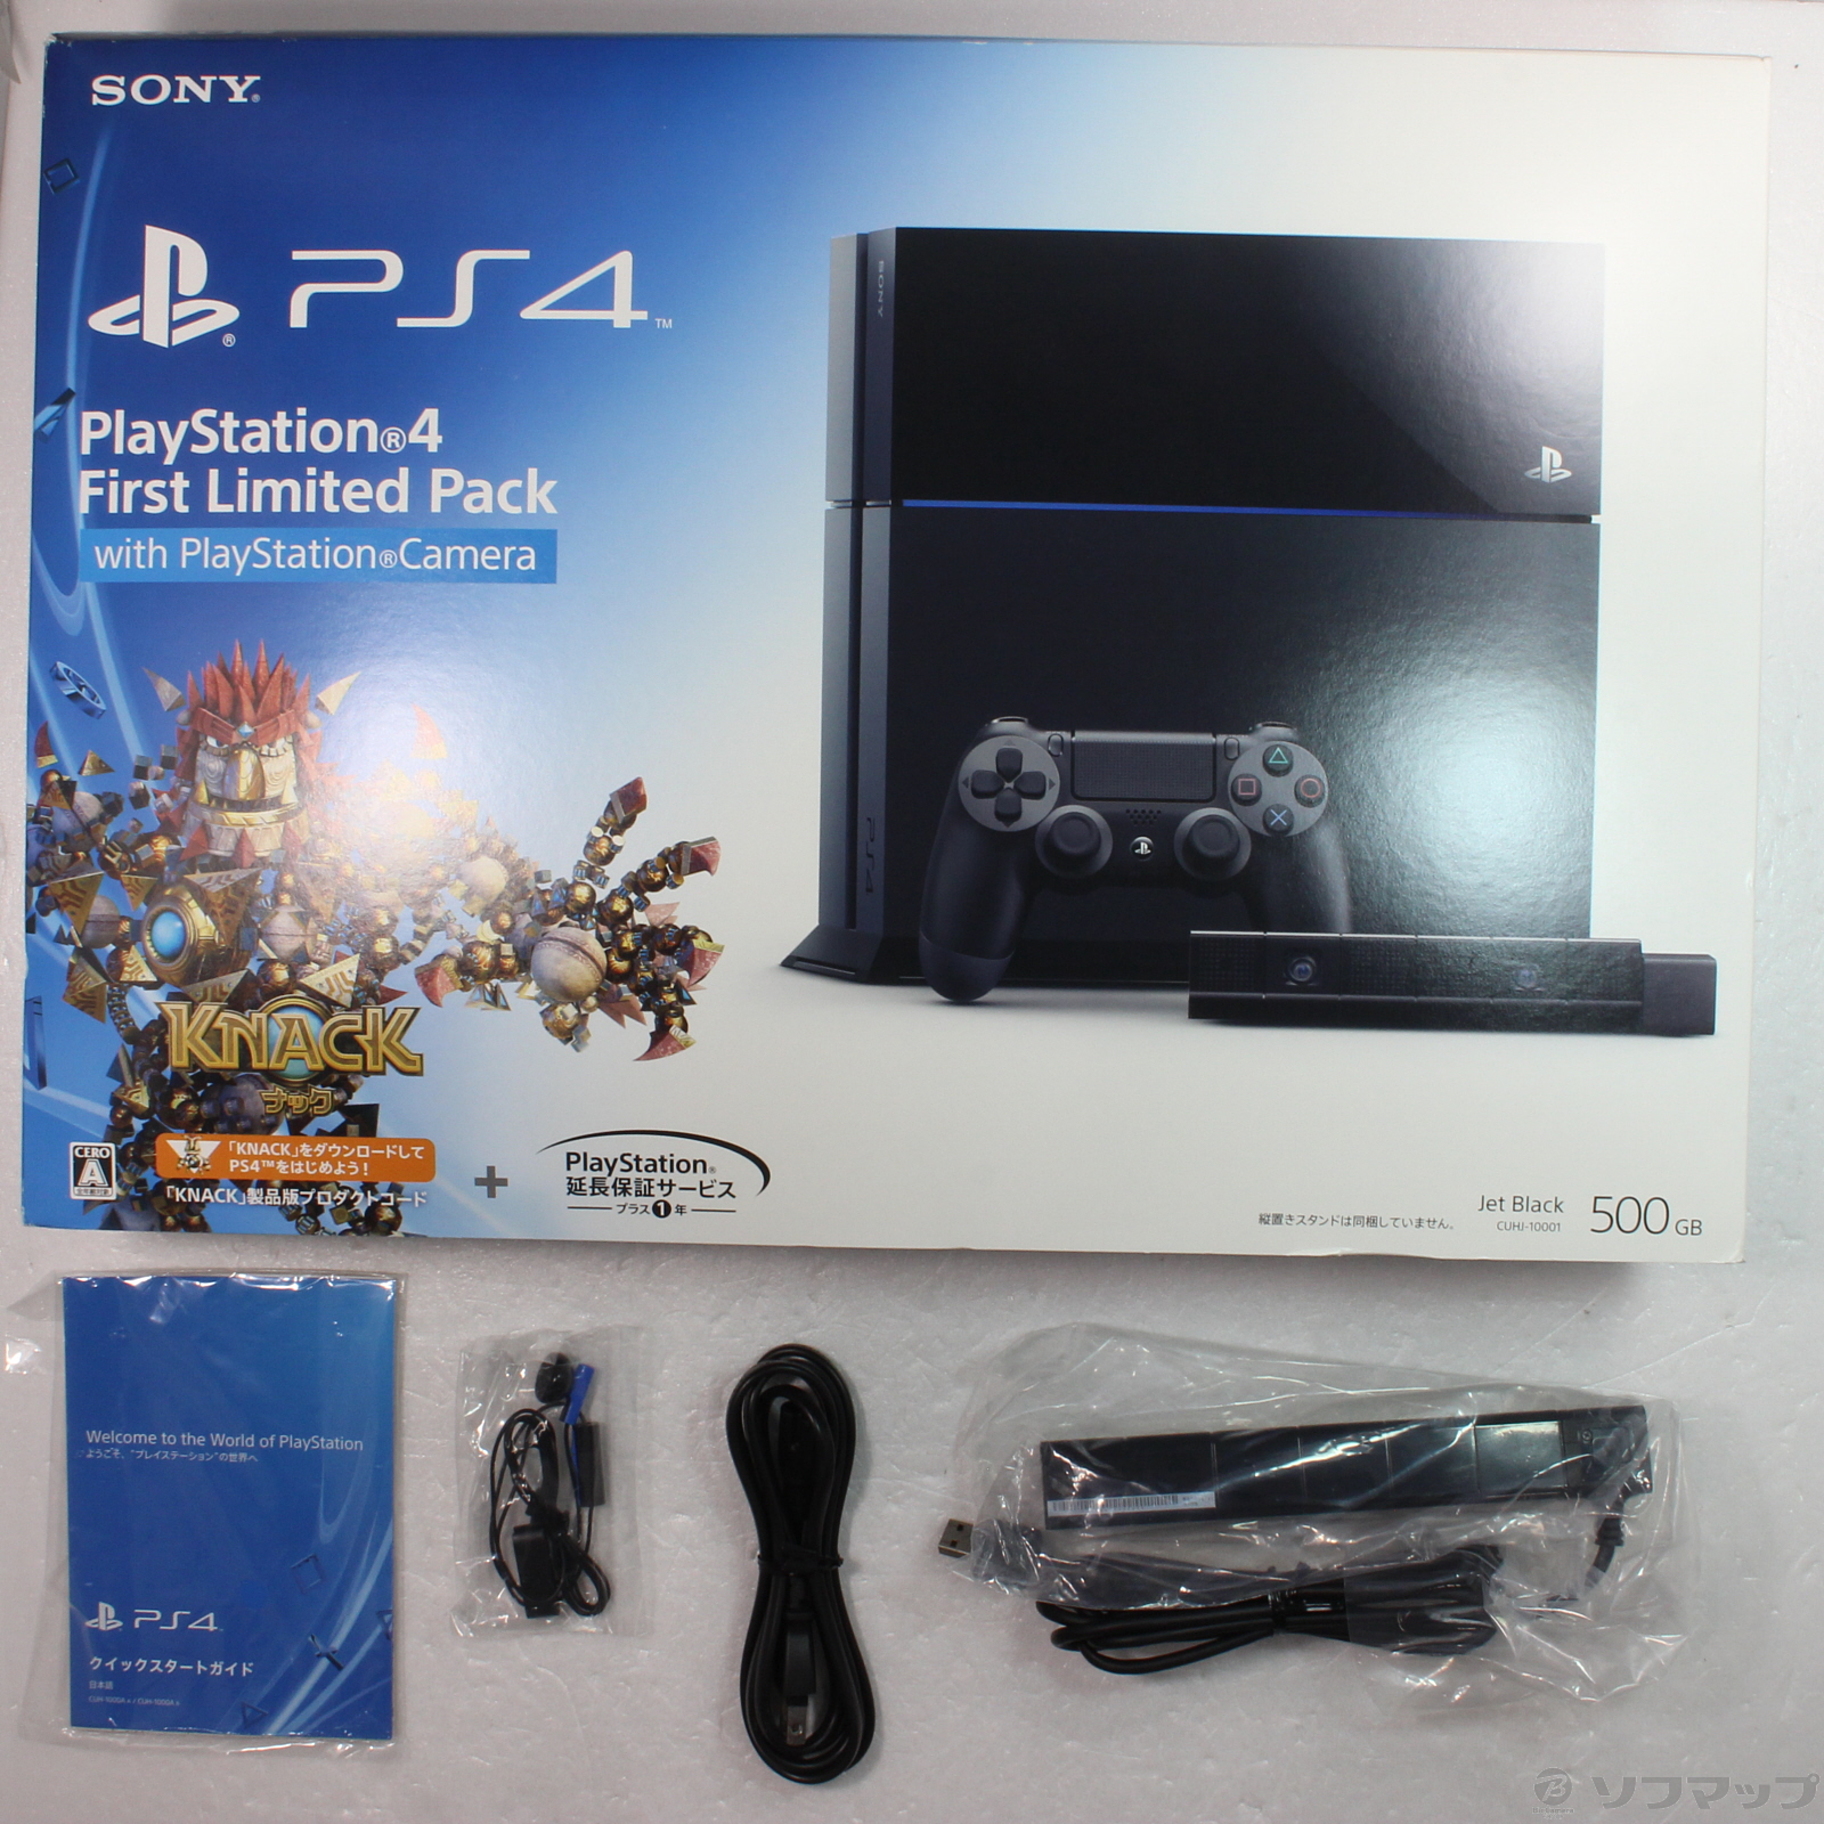 Playstation 4 First Limited Pack with Playstation Camera (プレイステーション4専用ソフト KNACK ダウンロード用 プロダクトコード 同梱)